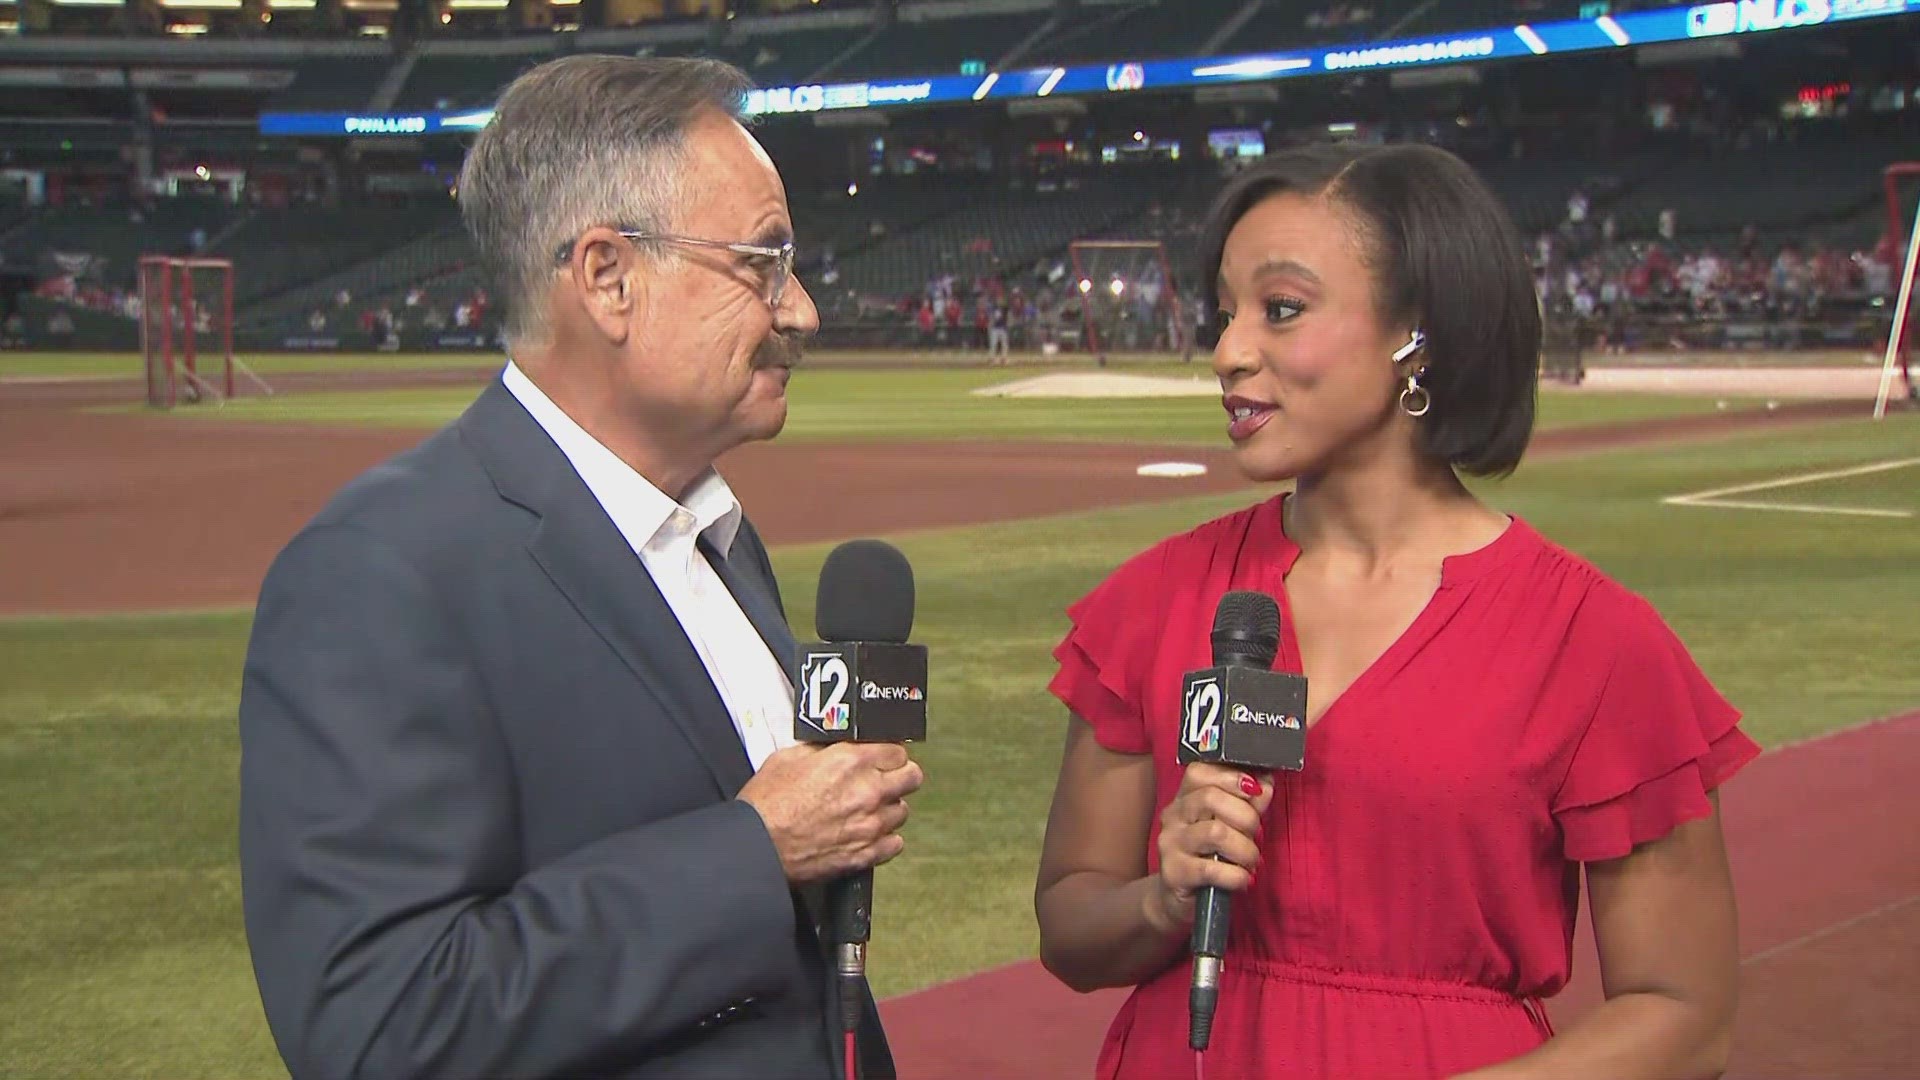 Ahead of NLCS Game 4, 12News Mark Curtis talks about the challenges and triumphs of the Diamondbacks during NLCS Game 3 with 12News Lina Washington.